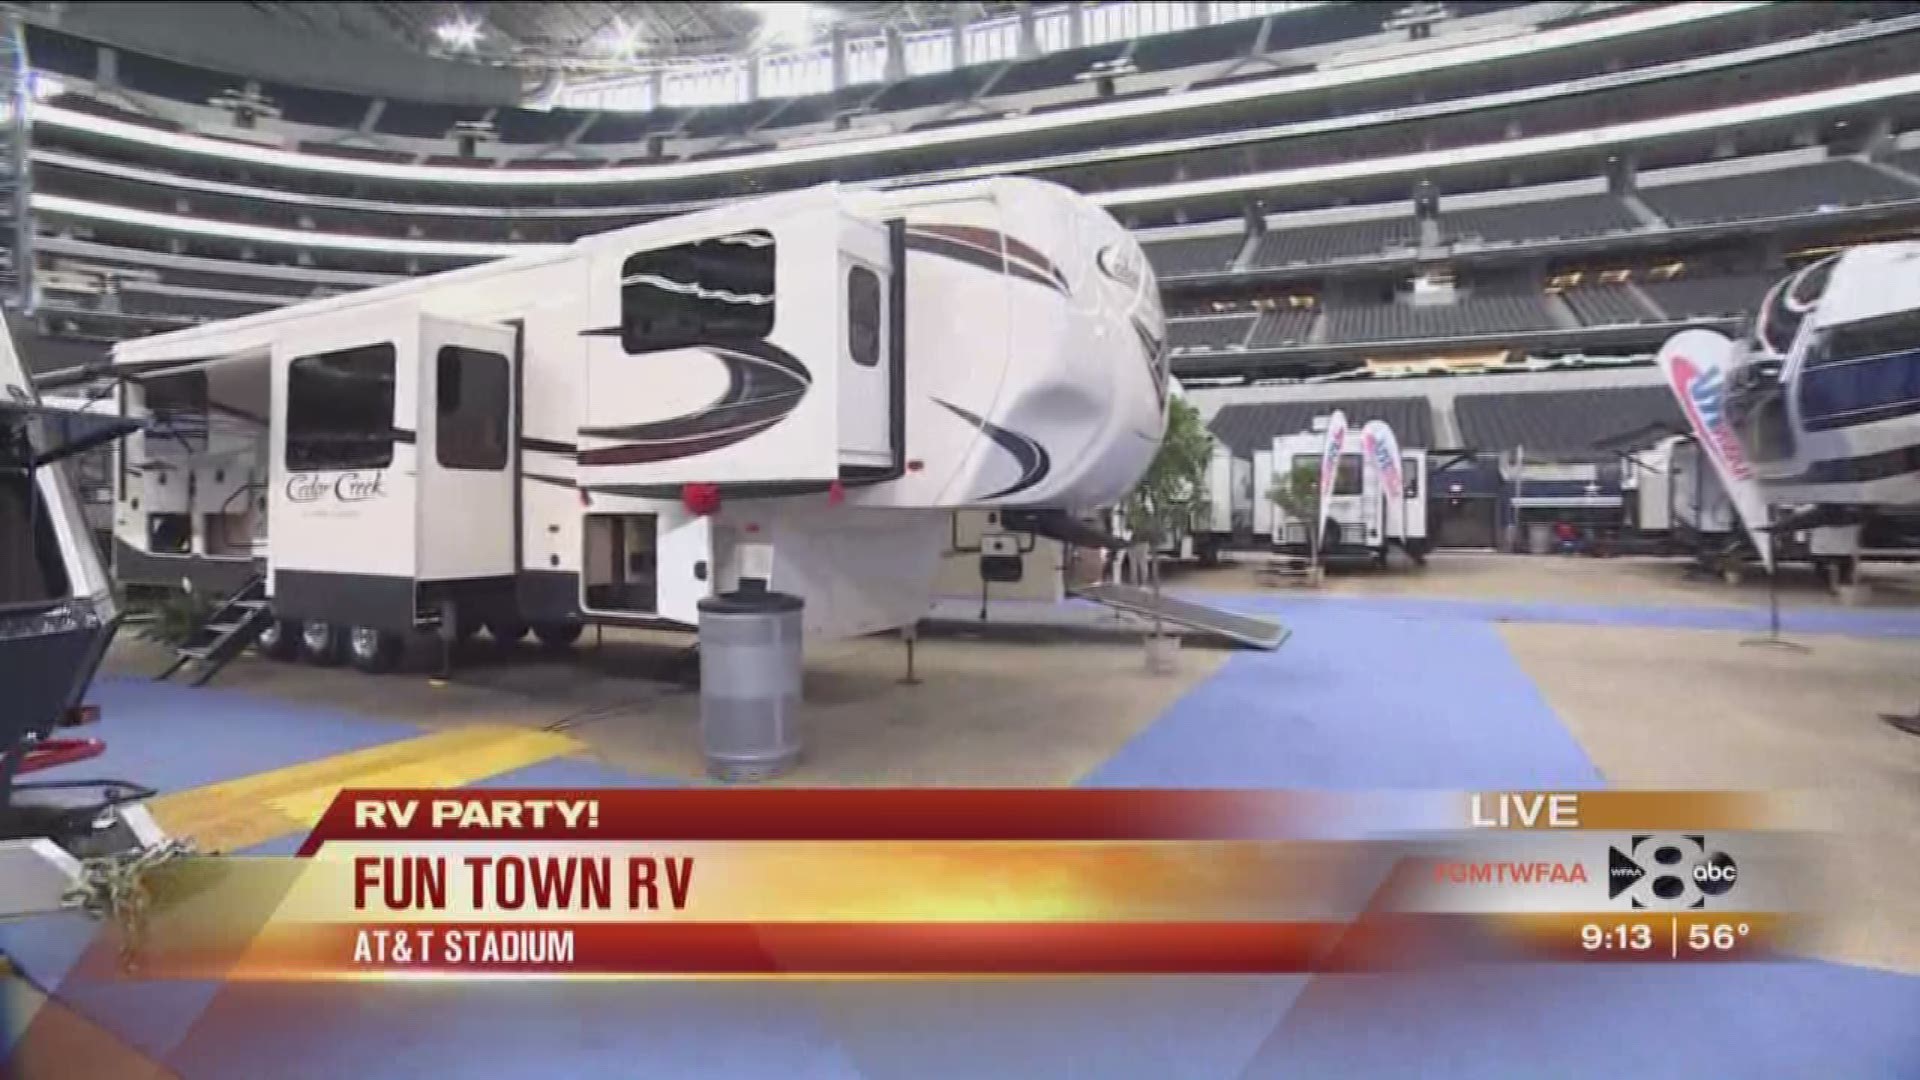 It's a RV Party with Fun Town RV at AT&T Stadium